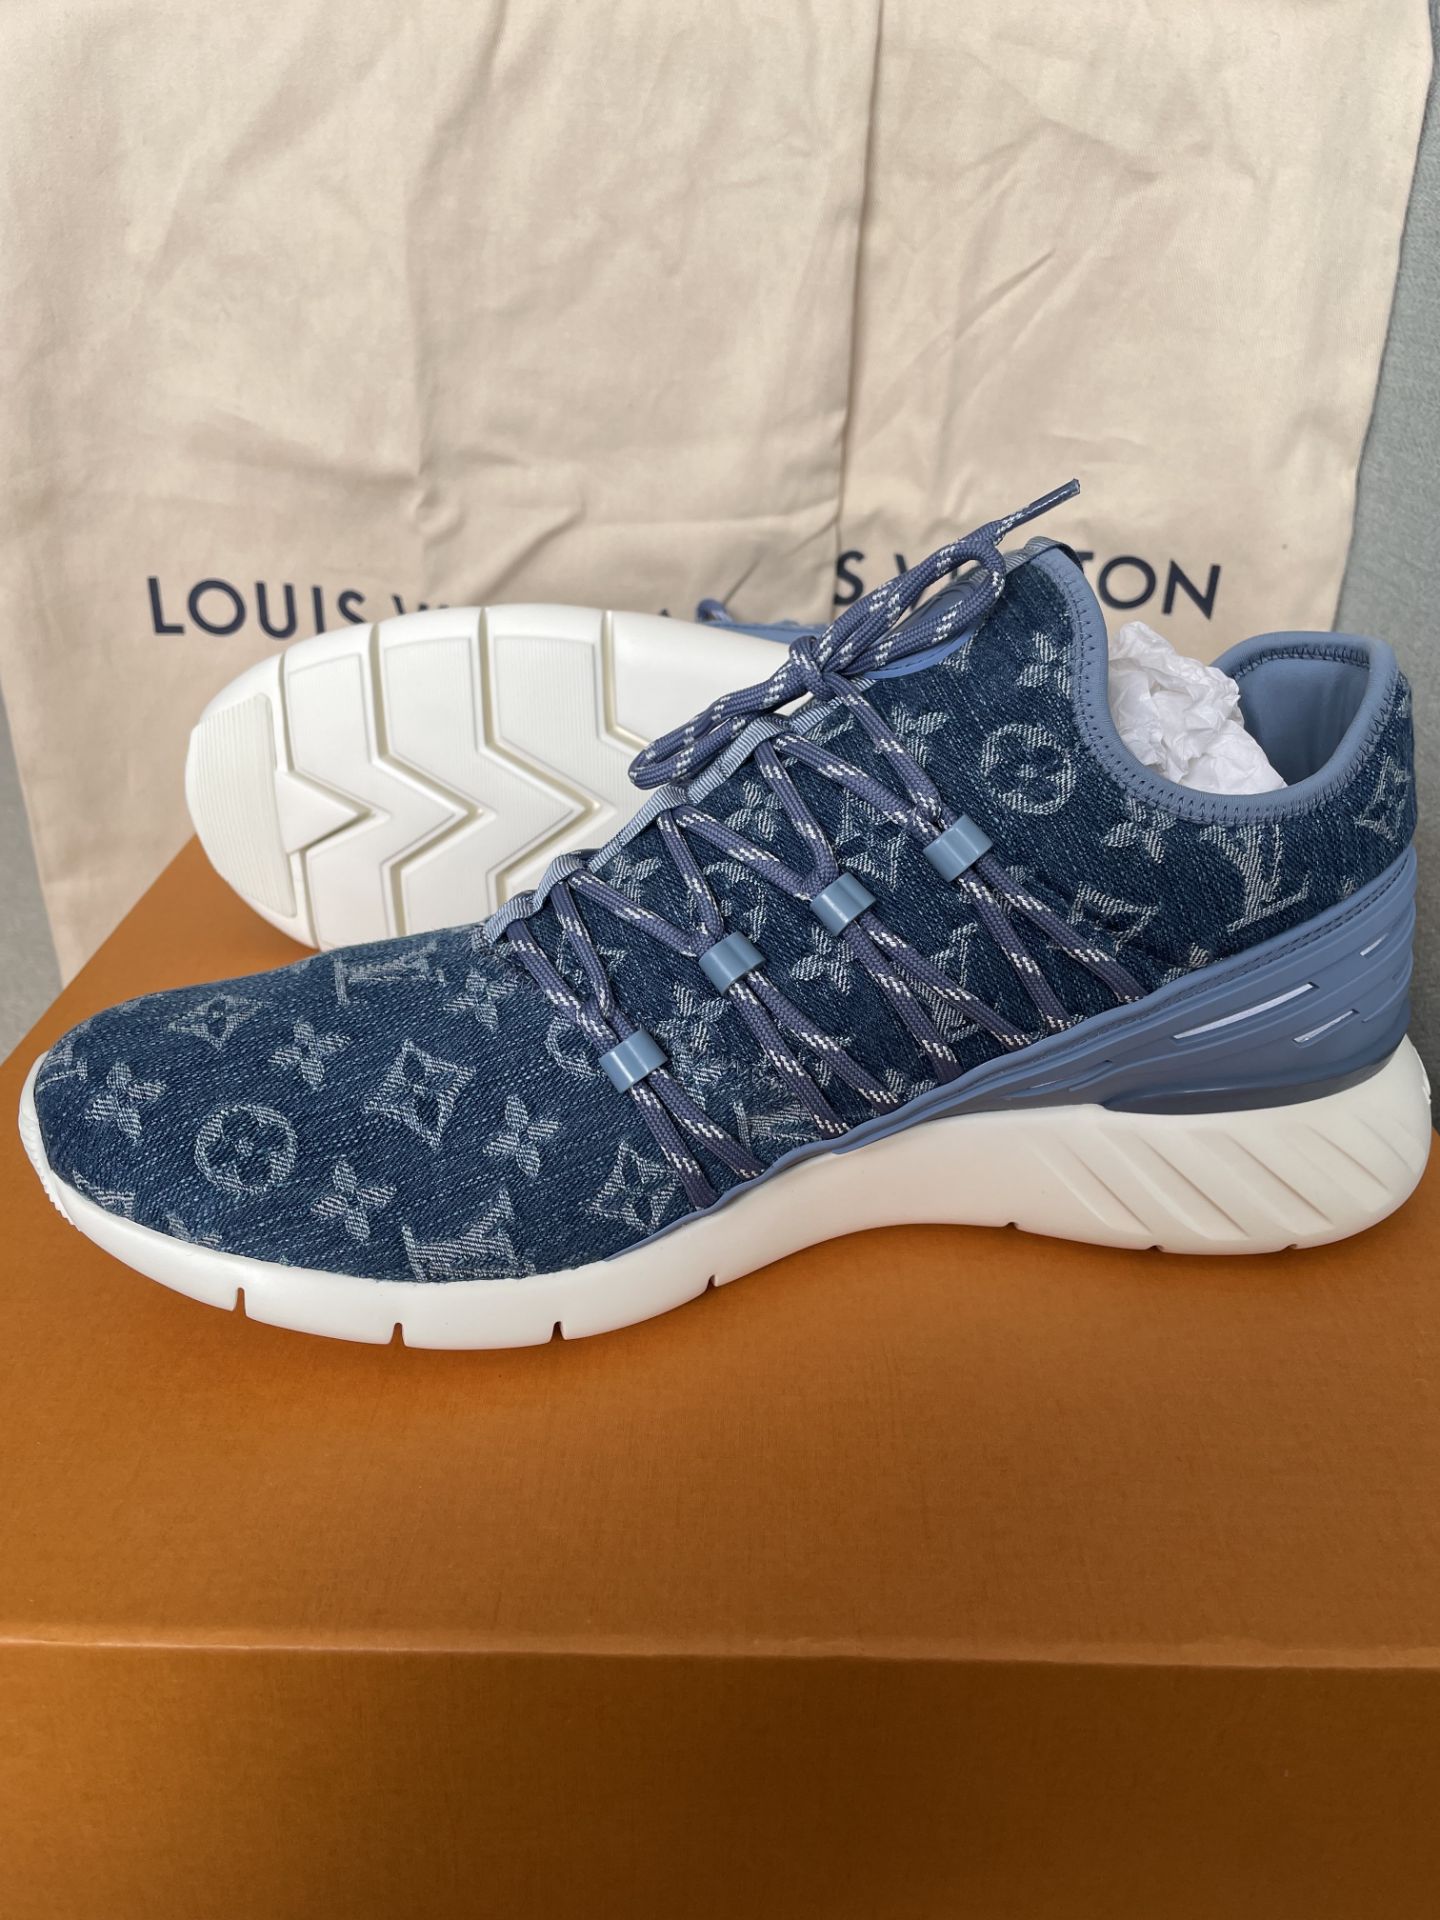 Louis Vuitton Fast Line Sneakers 9.5 - Image 2 of 7